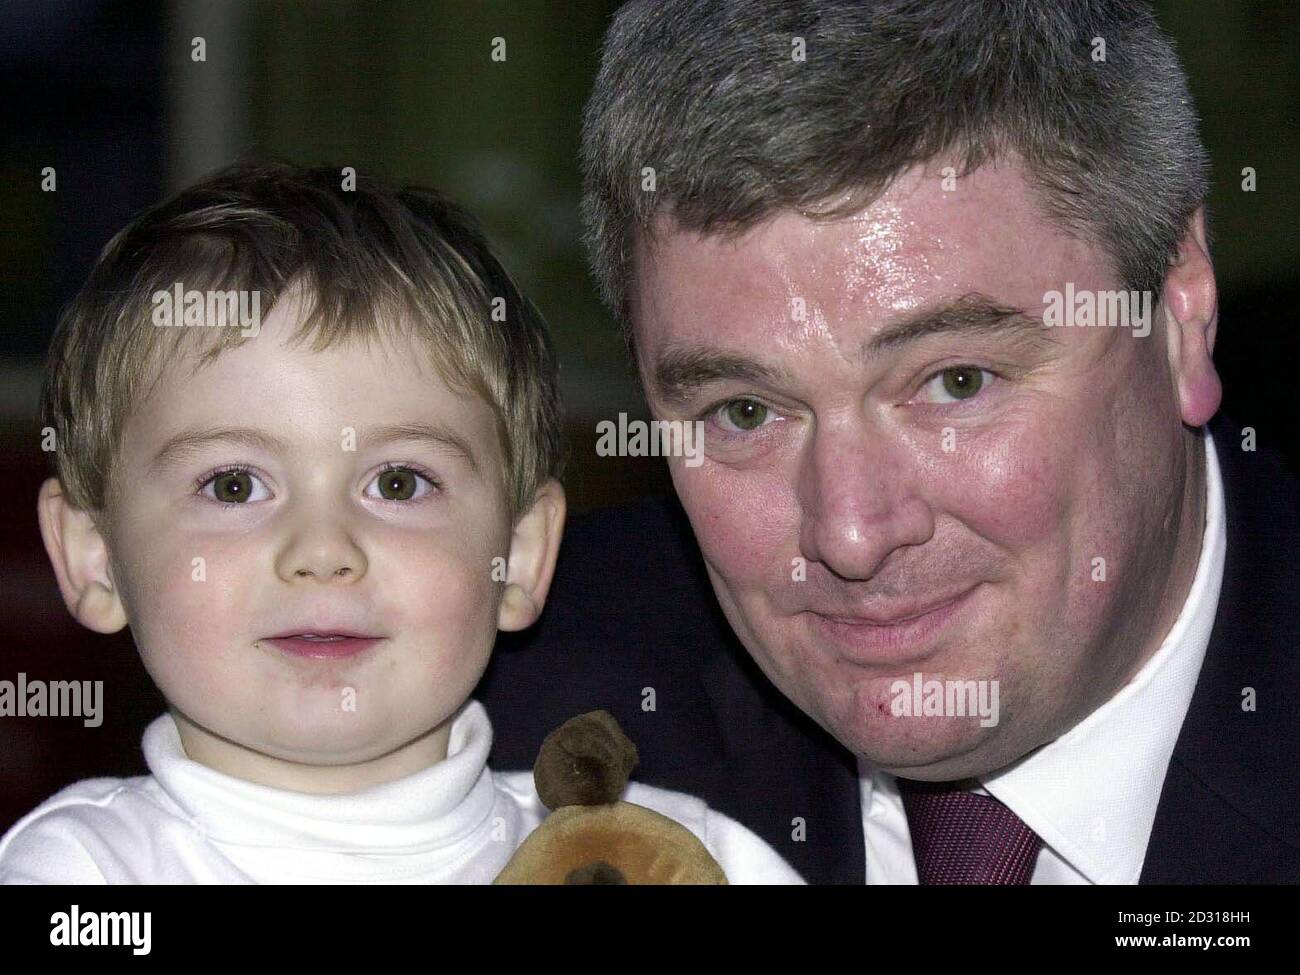 Mr Peter Moore and his son Charlie, two, from Newark, Notts, at the Queen Elizabeth Hospital in Welwyn Garden City. They were visiting Mr Moore's wife, Karen, who was a passenger on the Kings Cross to Leeds train which derailed killing at least four people.   *... Emergency services at the scene reported 80 walking wounded after part of the eight coach GNER train came off the line. Mrs Moore is being treated for cuts and bruises.    Stock Photo